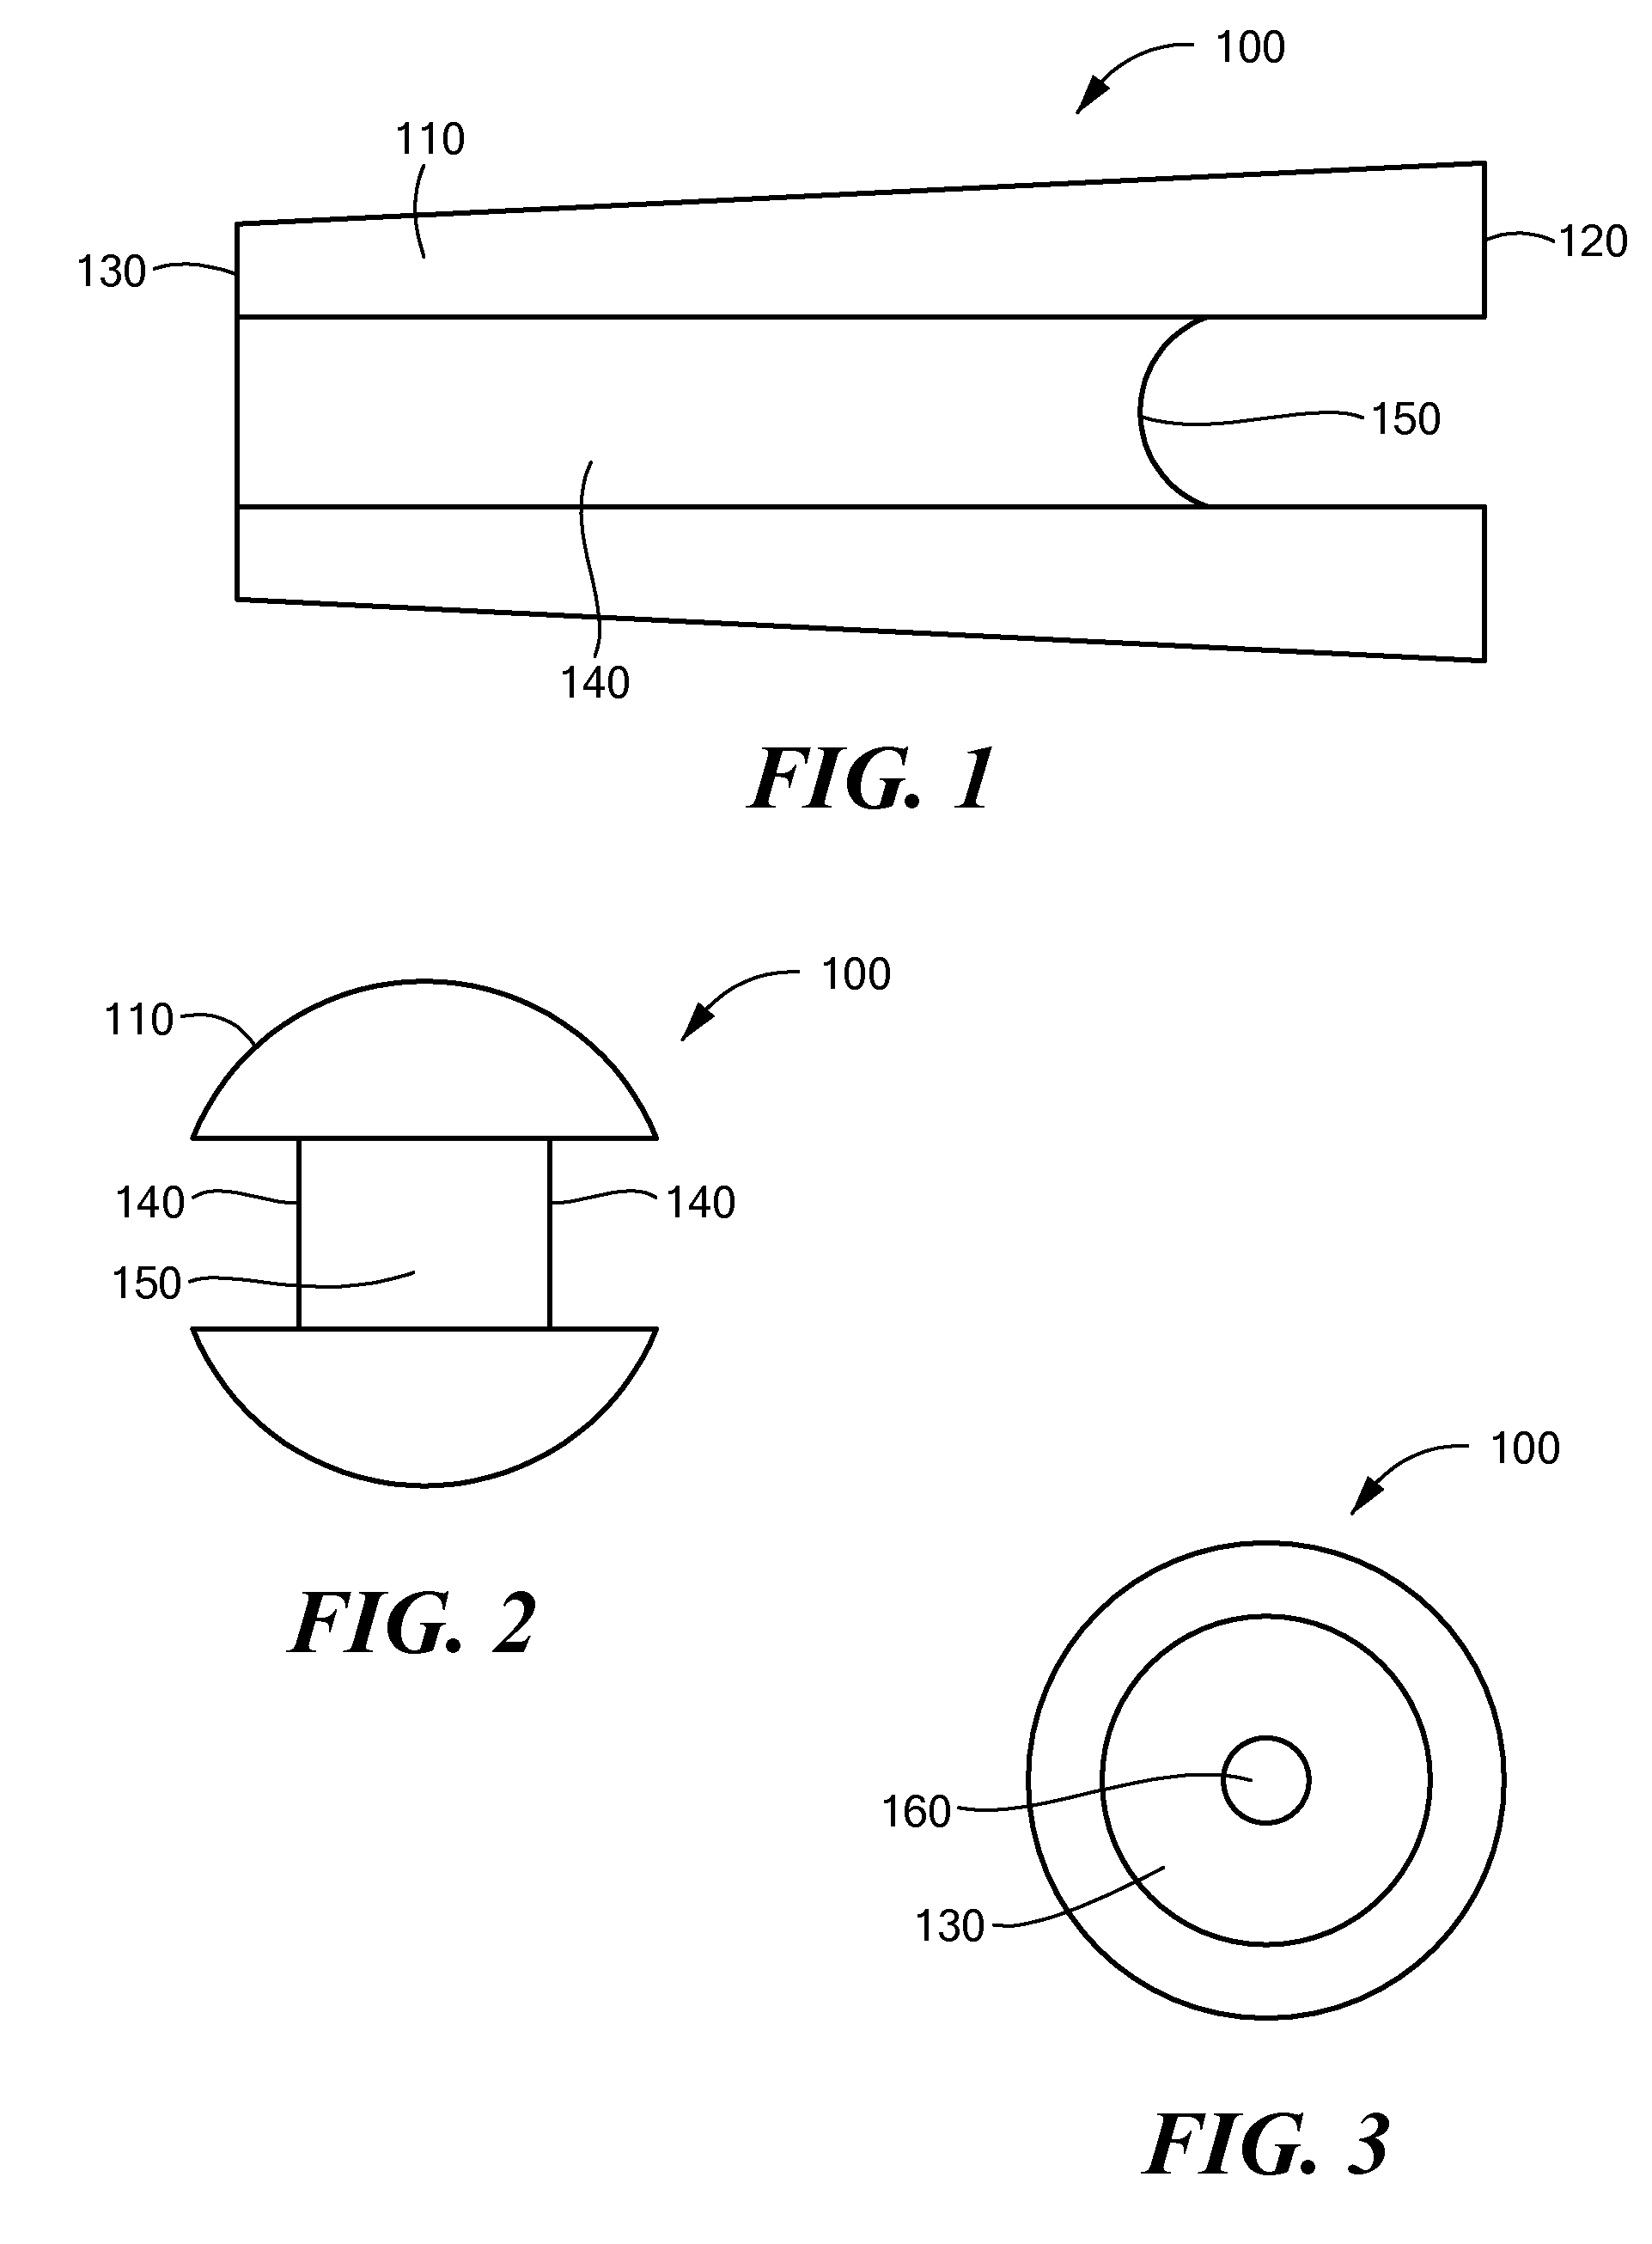 Method and Device for Stabilizing Joints With Limited Axial Movement